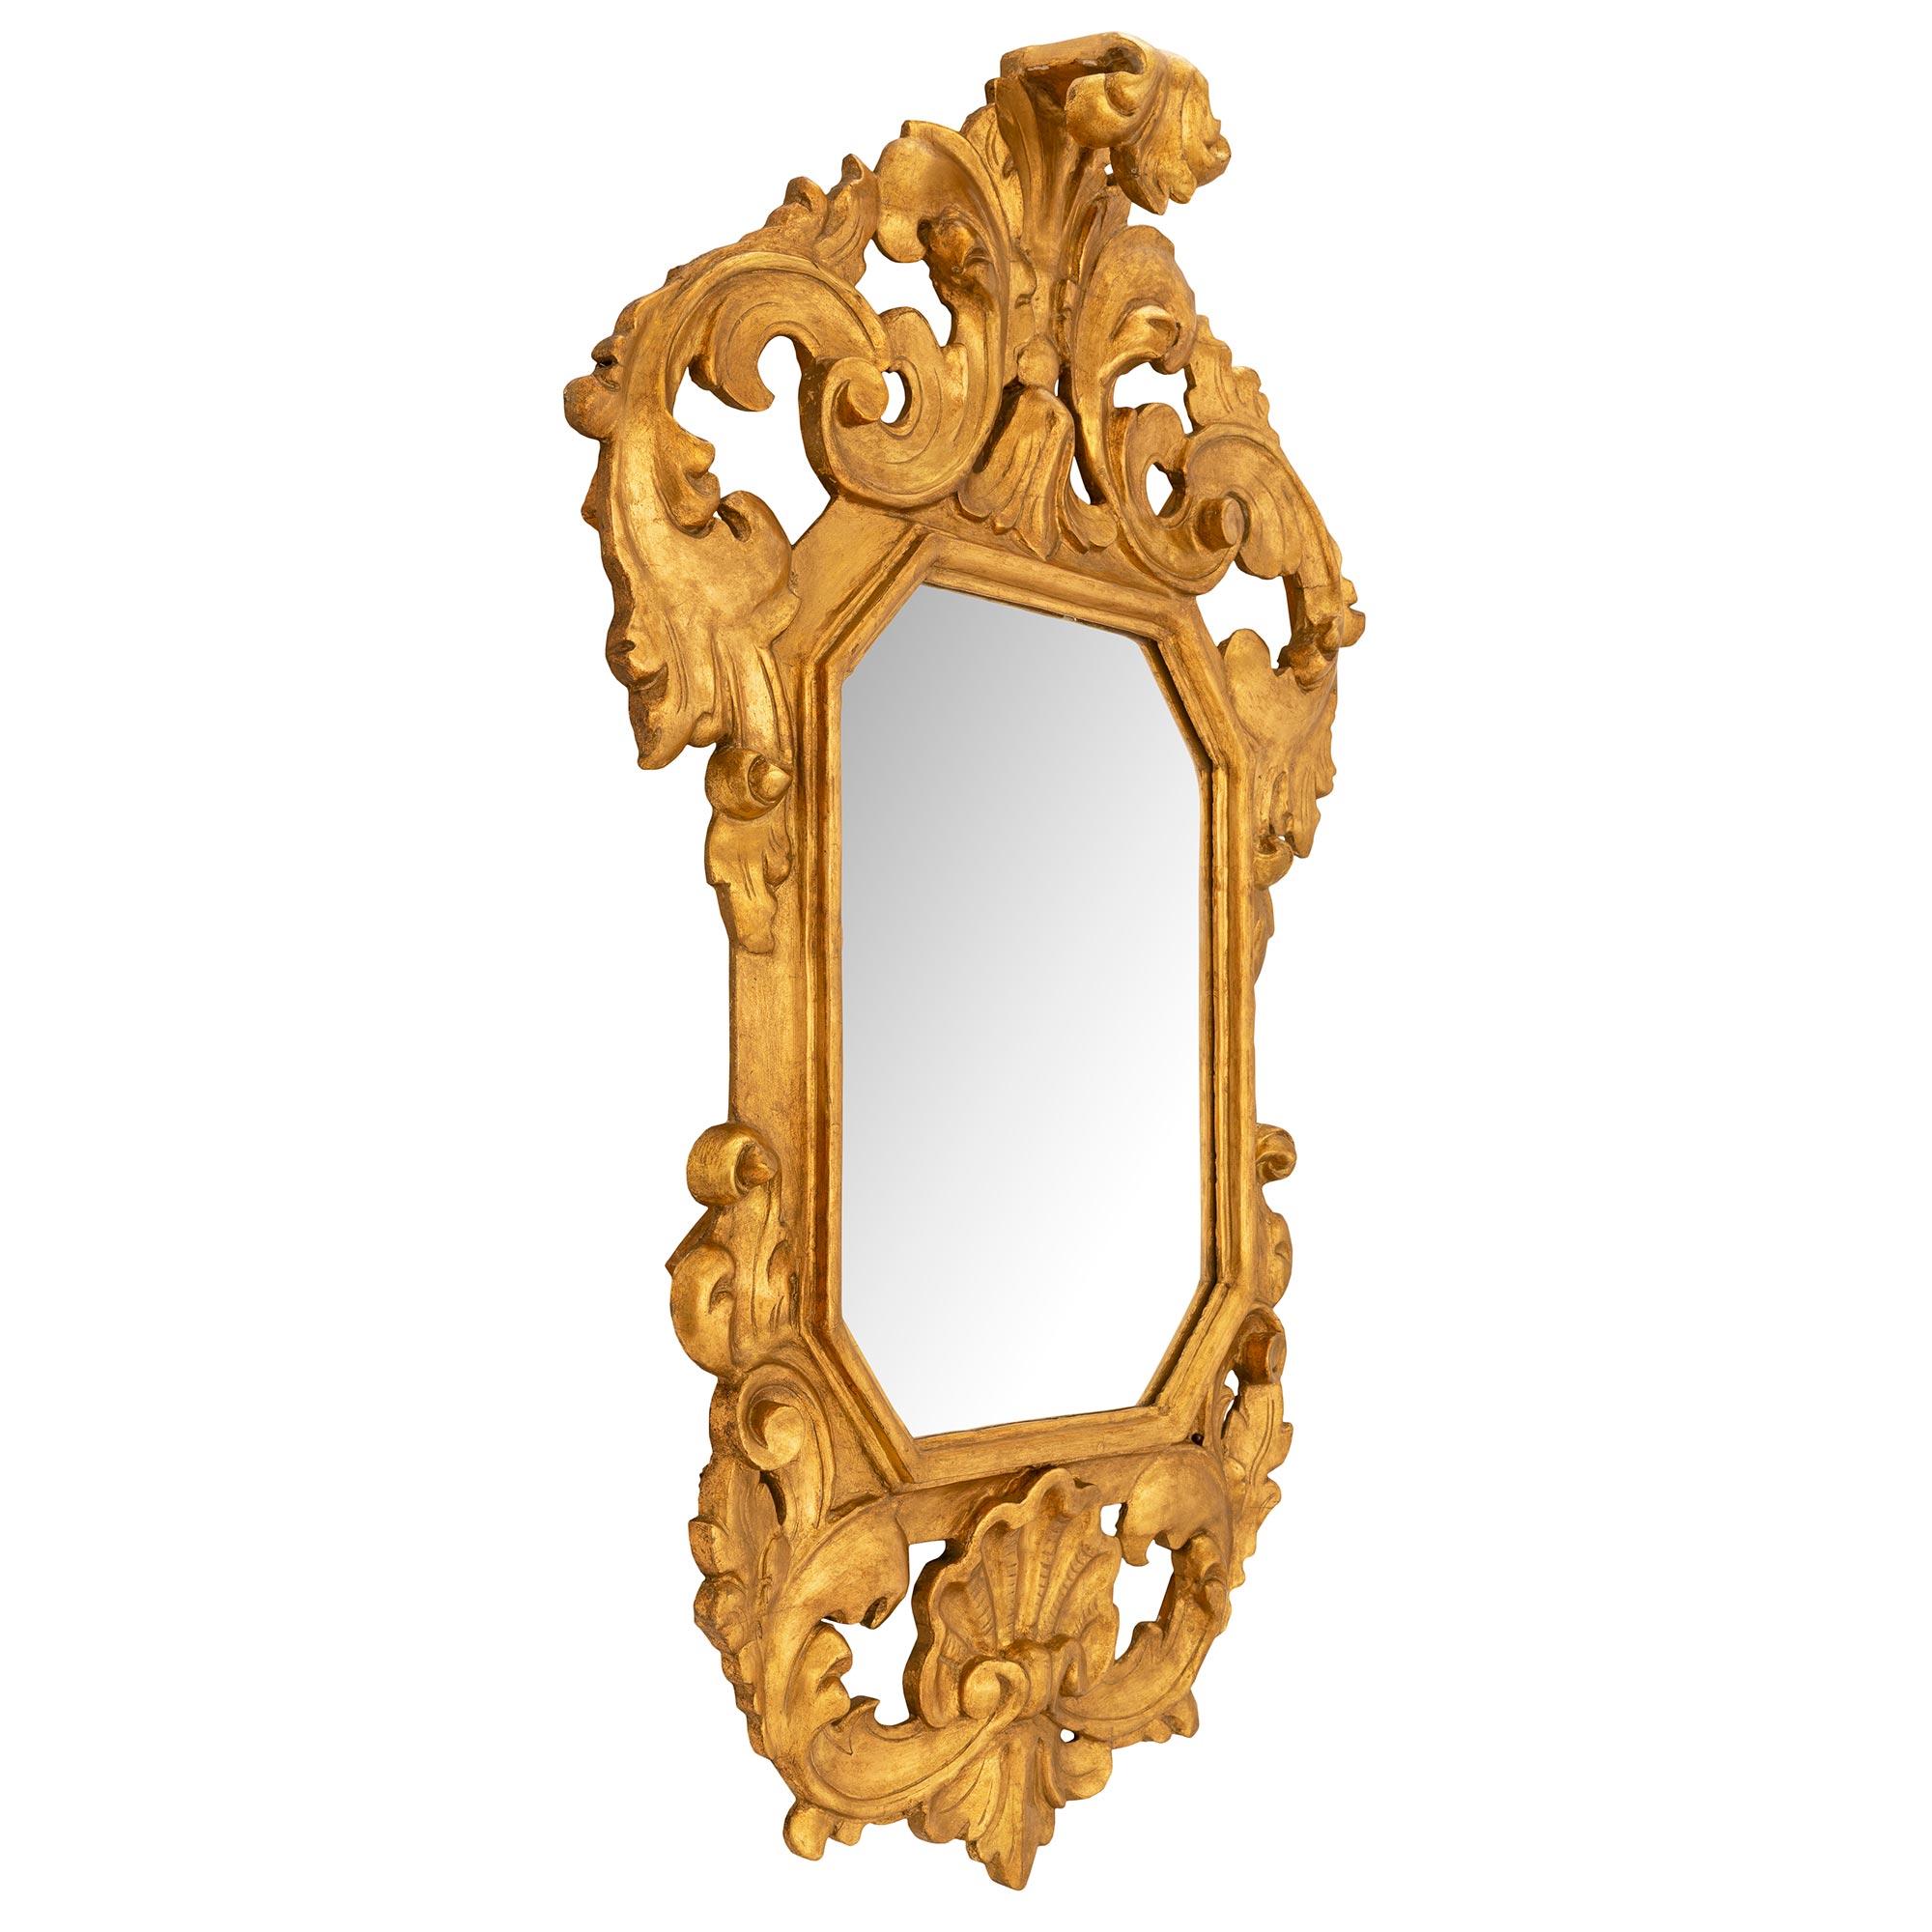 A wonderful Italian 19th century Baroque st. giltwood mirror. The original mirror plate is framed within a striking giltwood border with a large seashell cabochon at the bottom flanked by scrolling foliate movements leading up the side. At the top